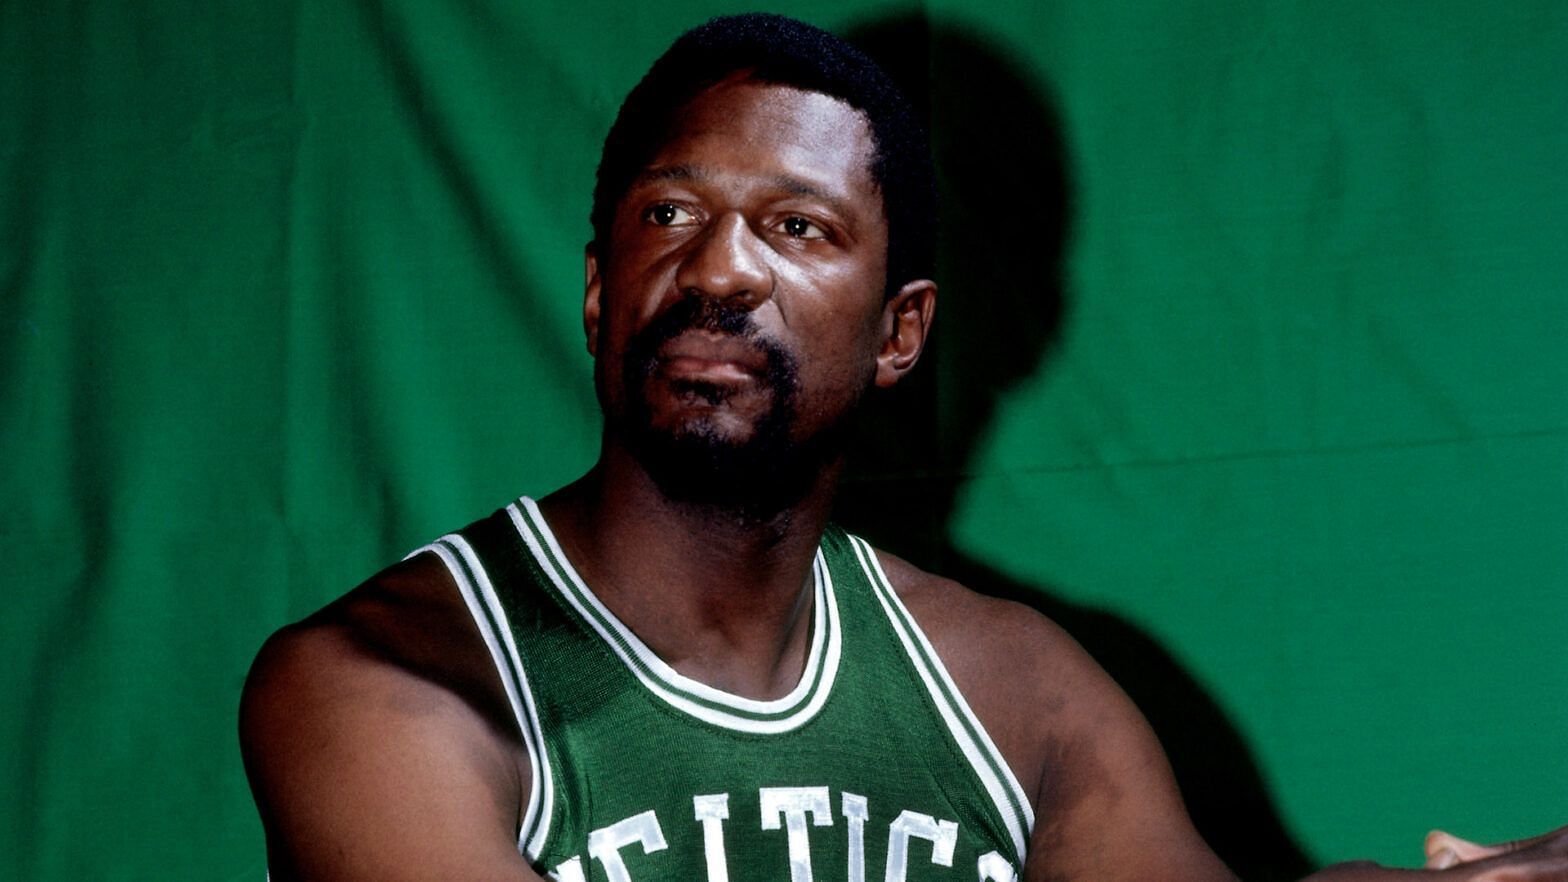 Bill Russell, during his time with the Boston Celtics